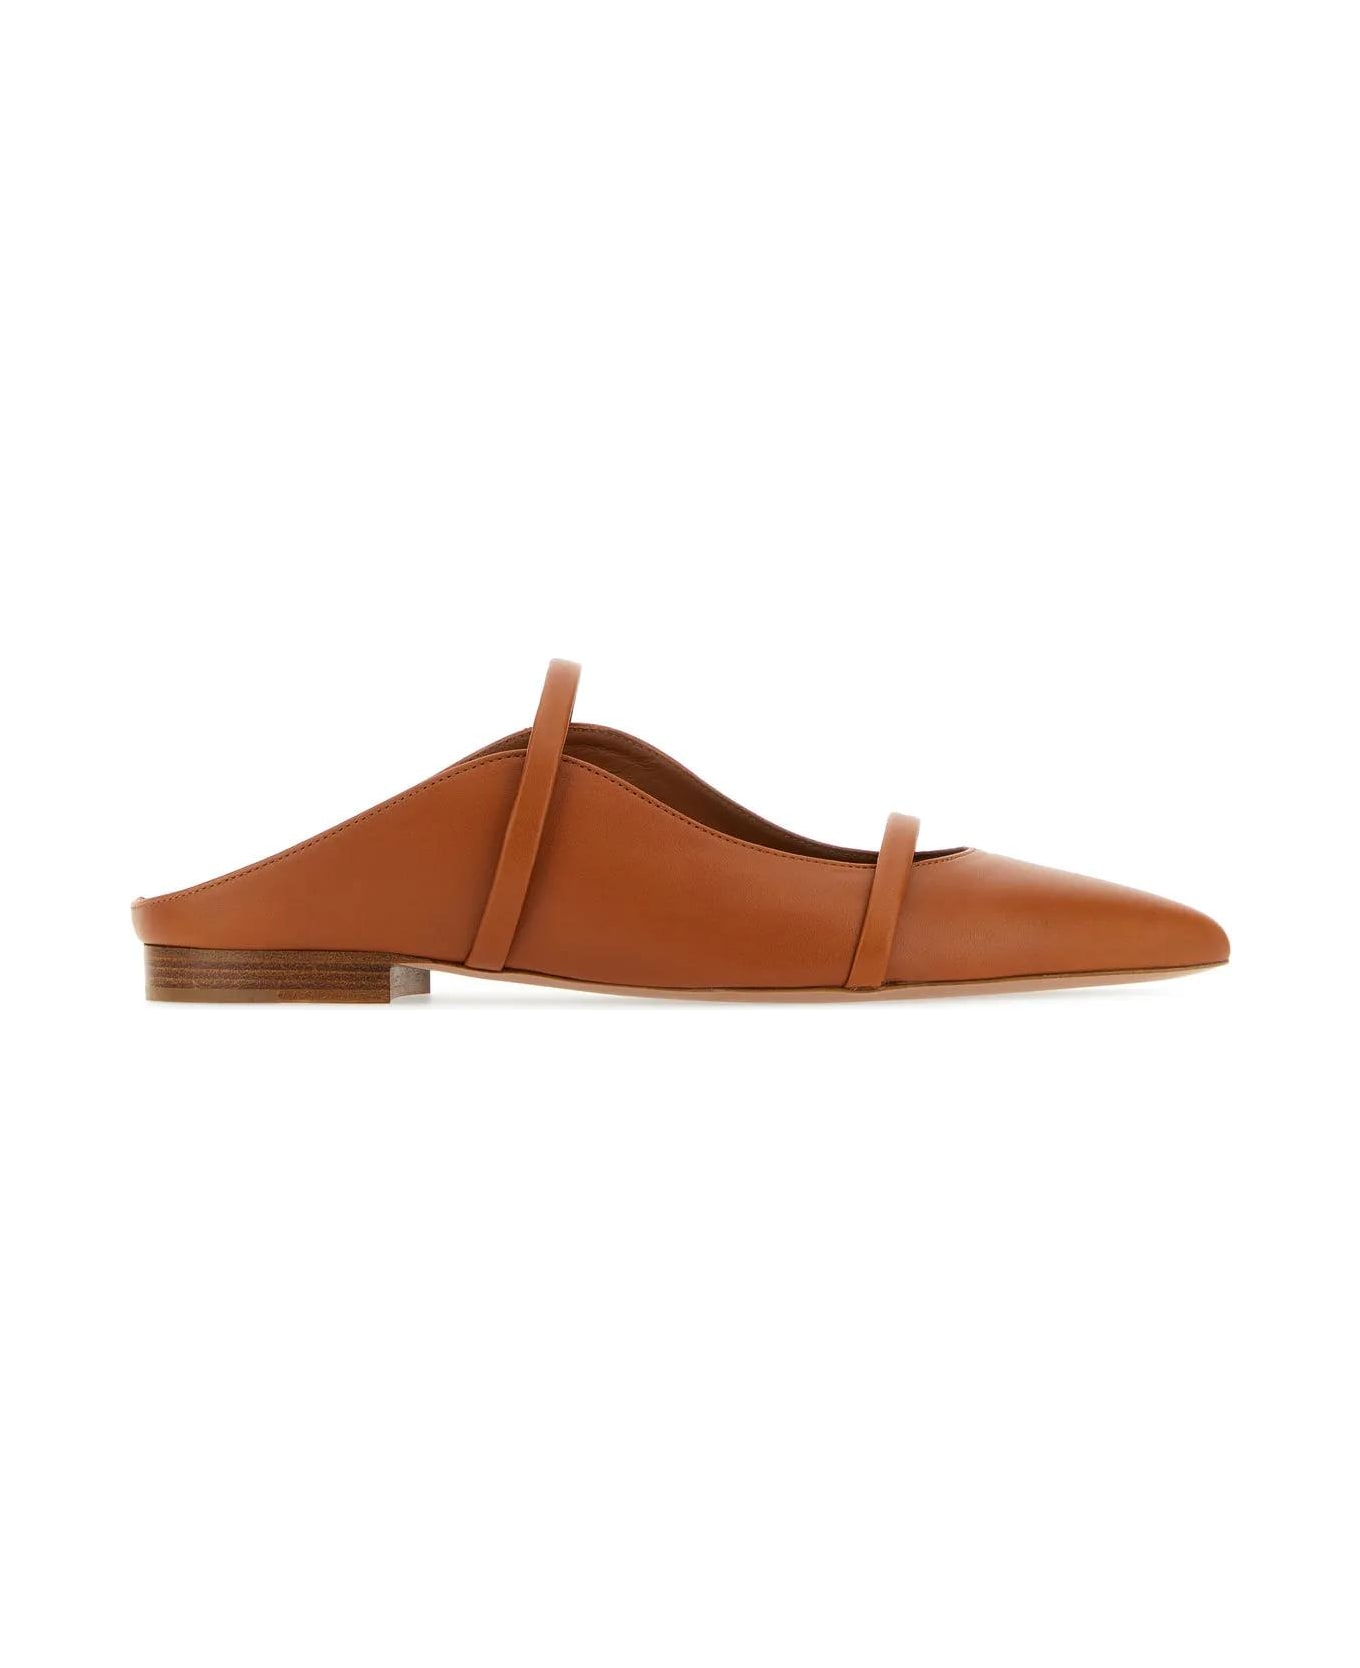 Malone Souliers Caramel Nappa Leather Maureen Flat Slippers - Brown フラットシューズ